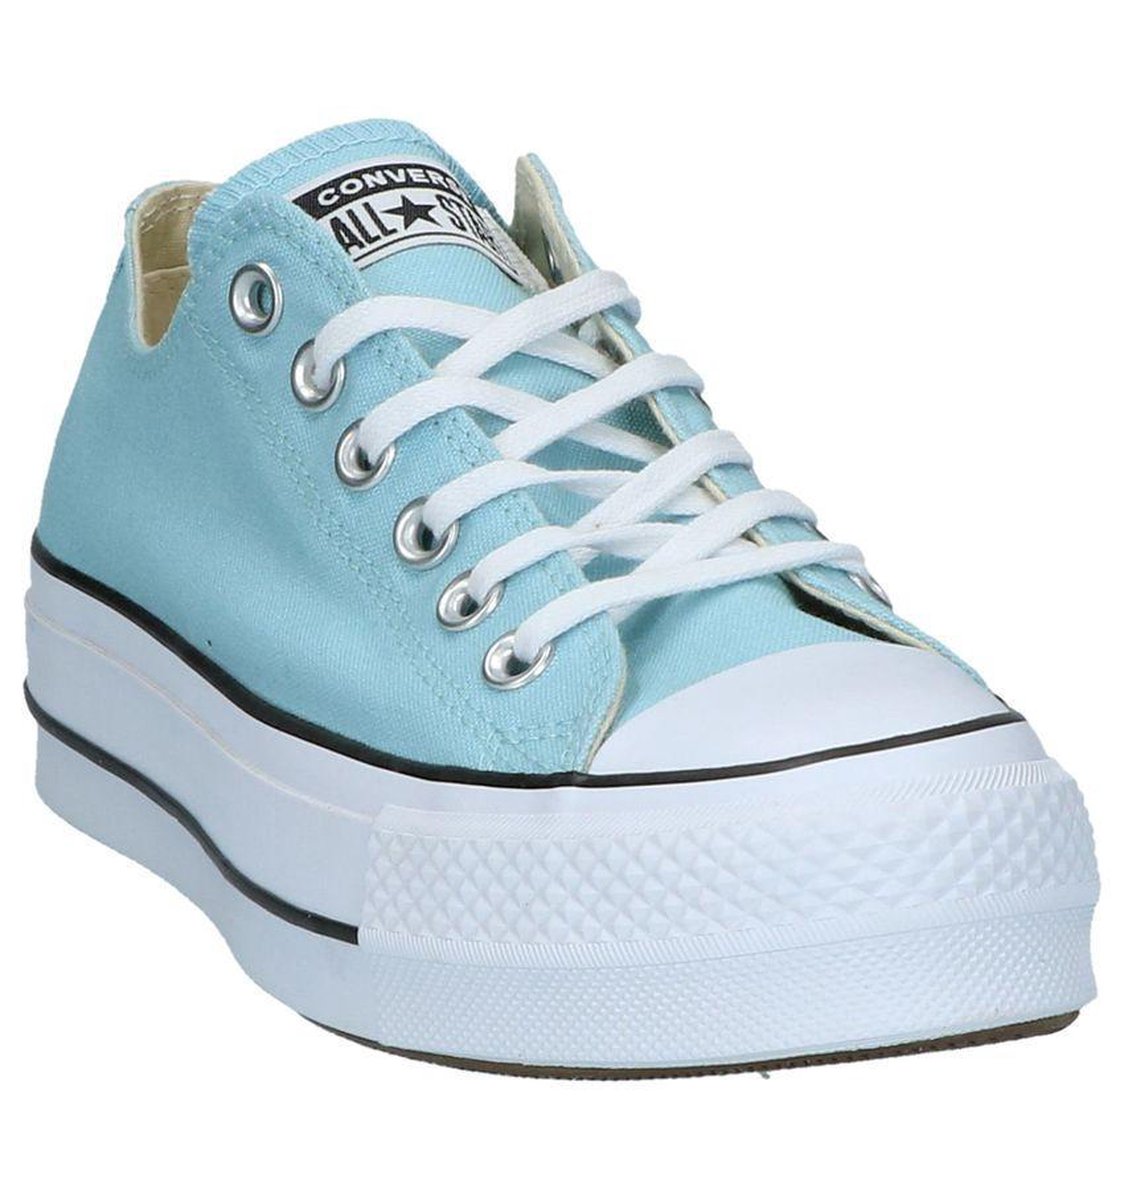 Lichtblauwe Converse Chuck Taylor All Star Lift Sneakers | bol.com